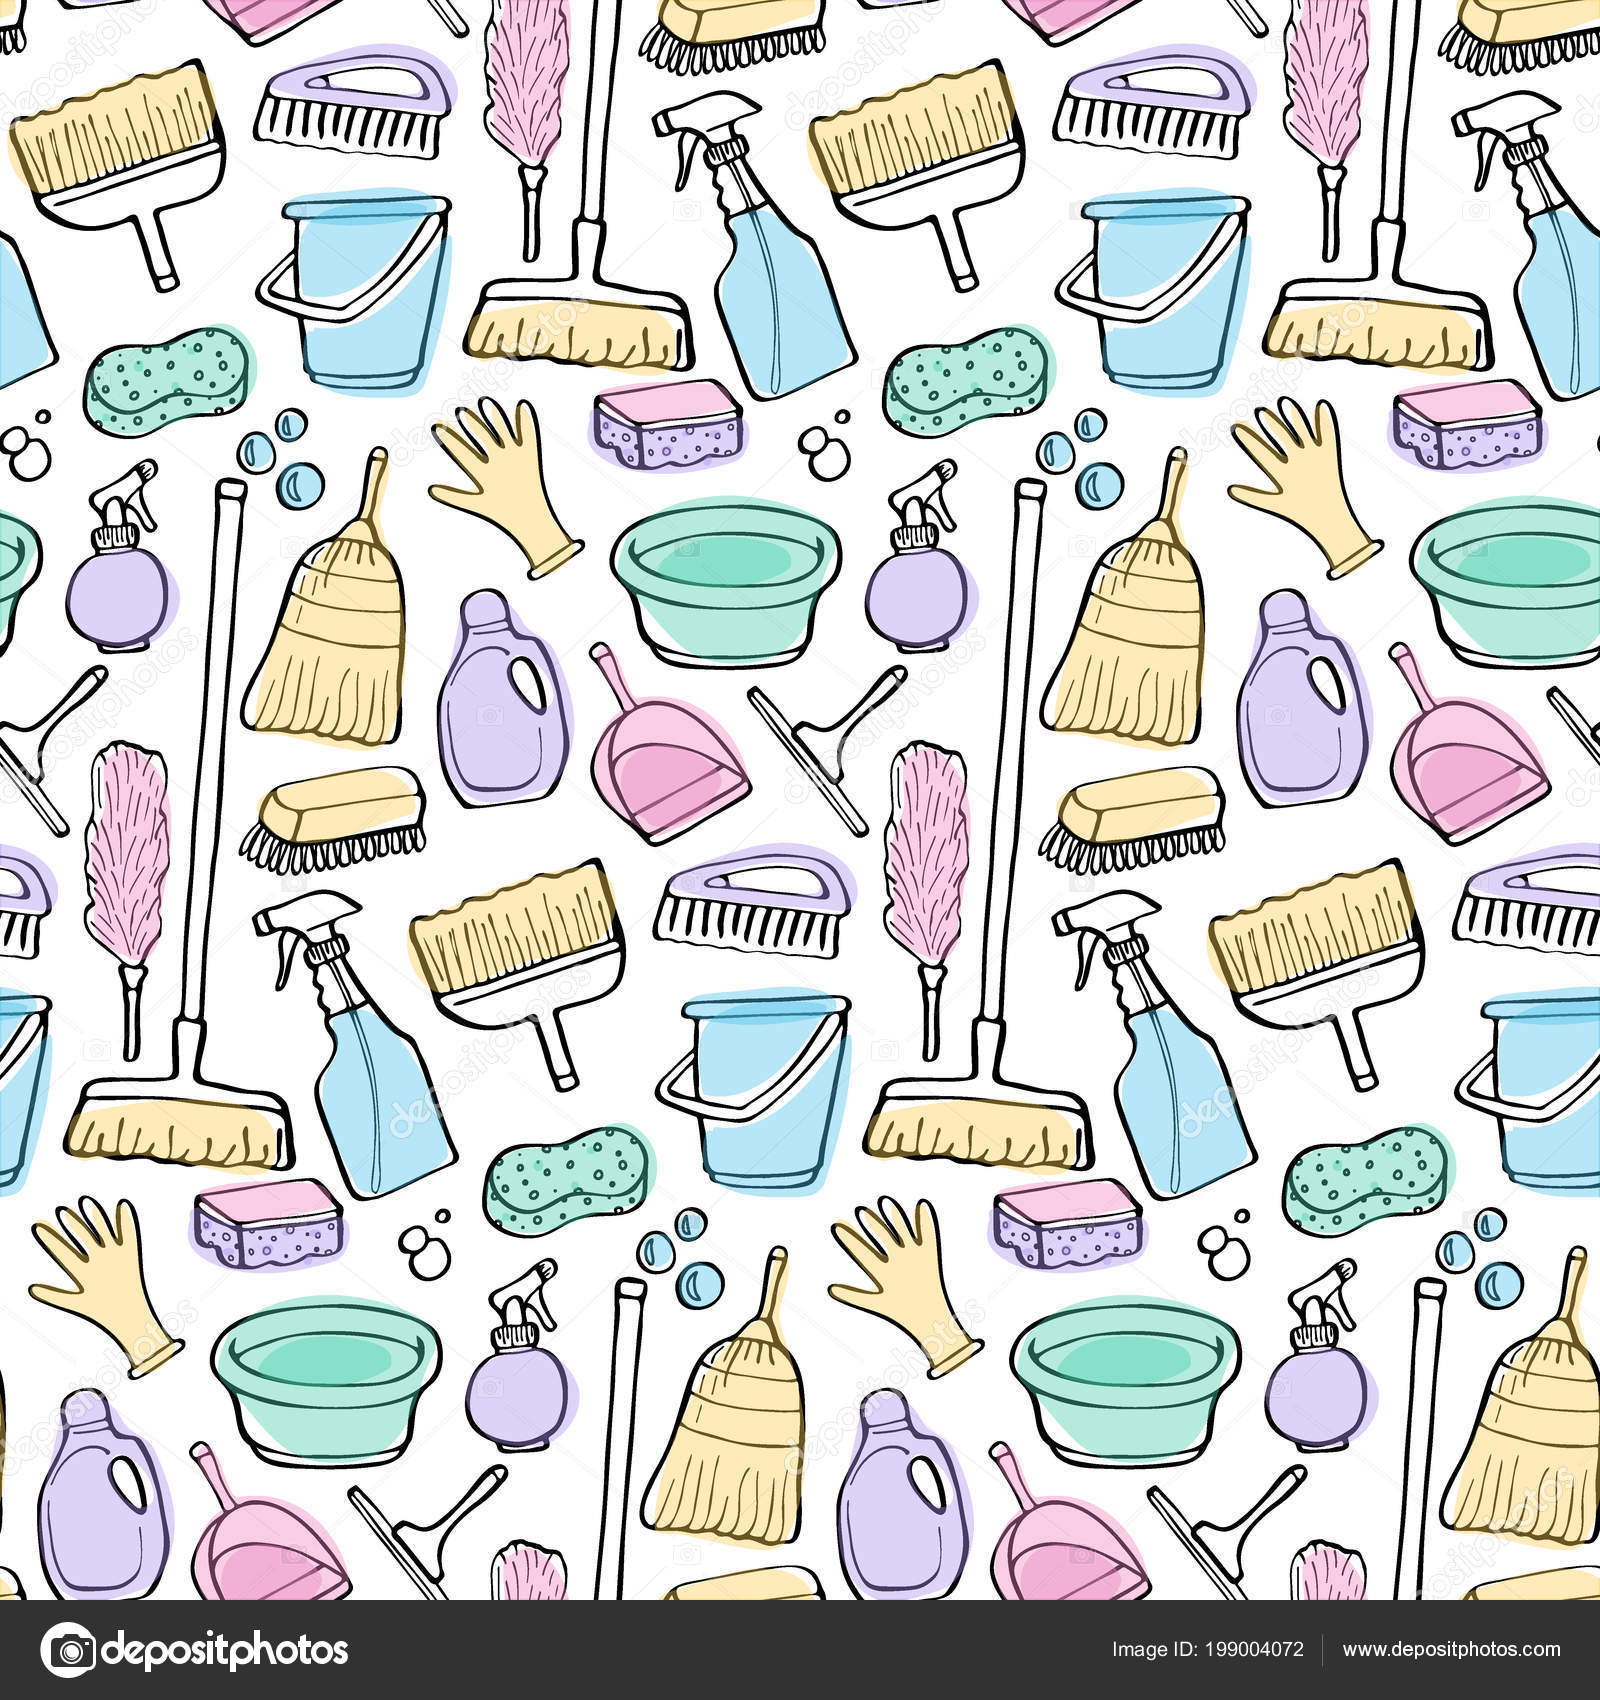 Premium Vector  Cleaning tools doodle illustration with colored